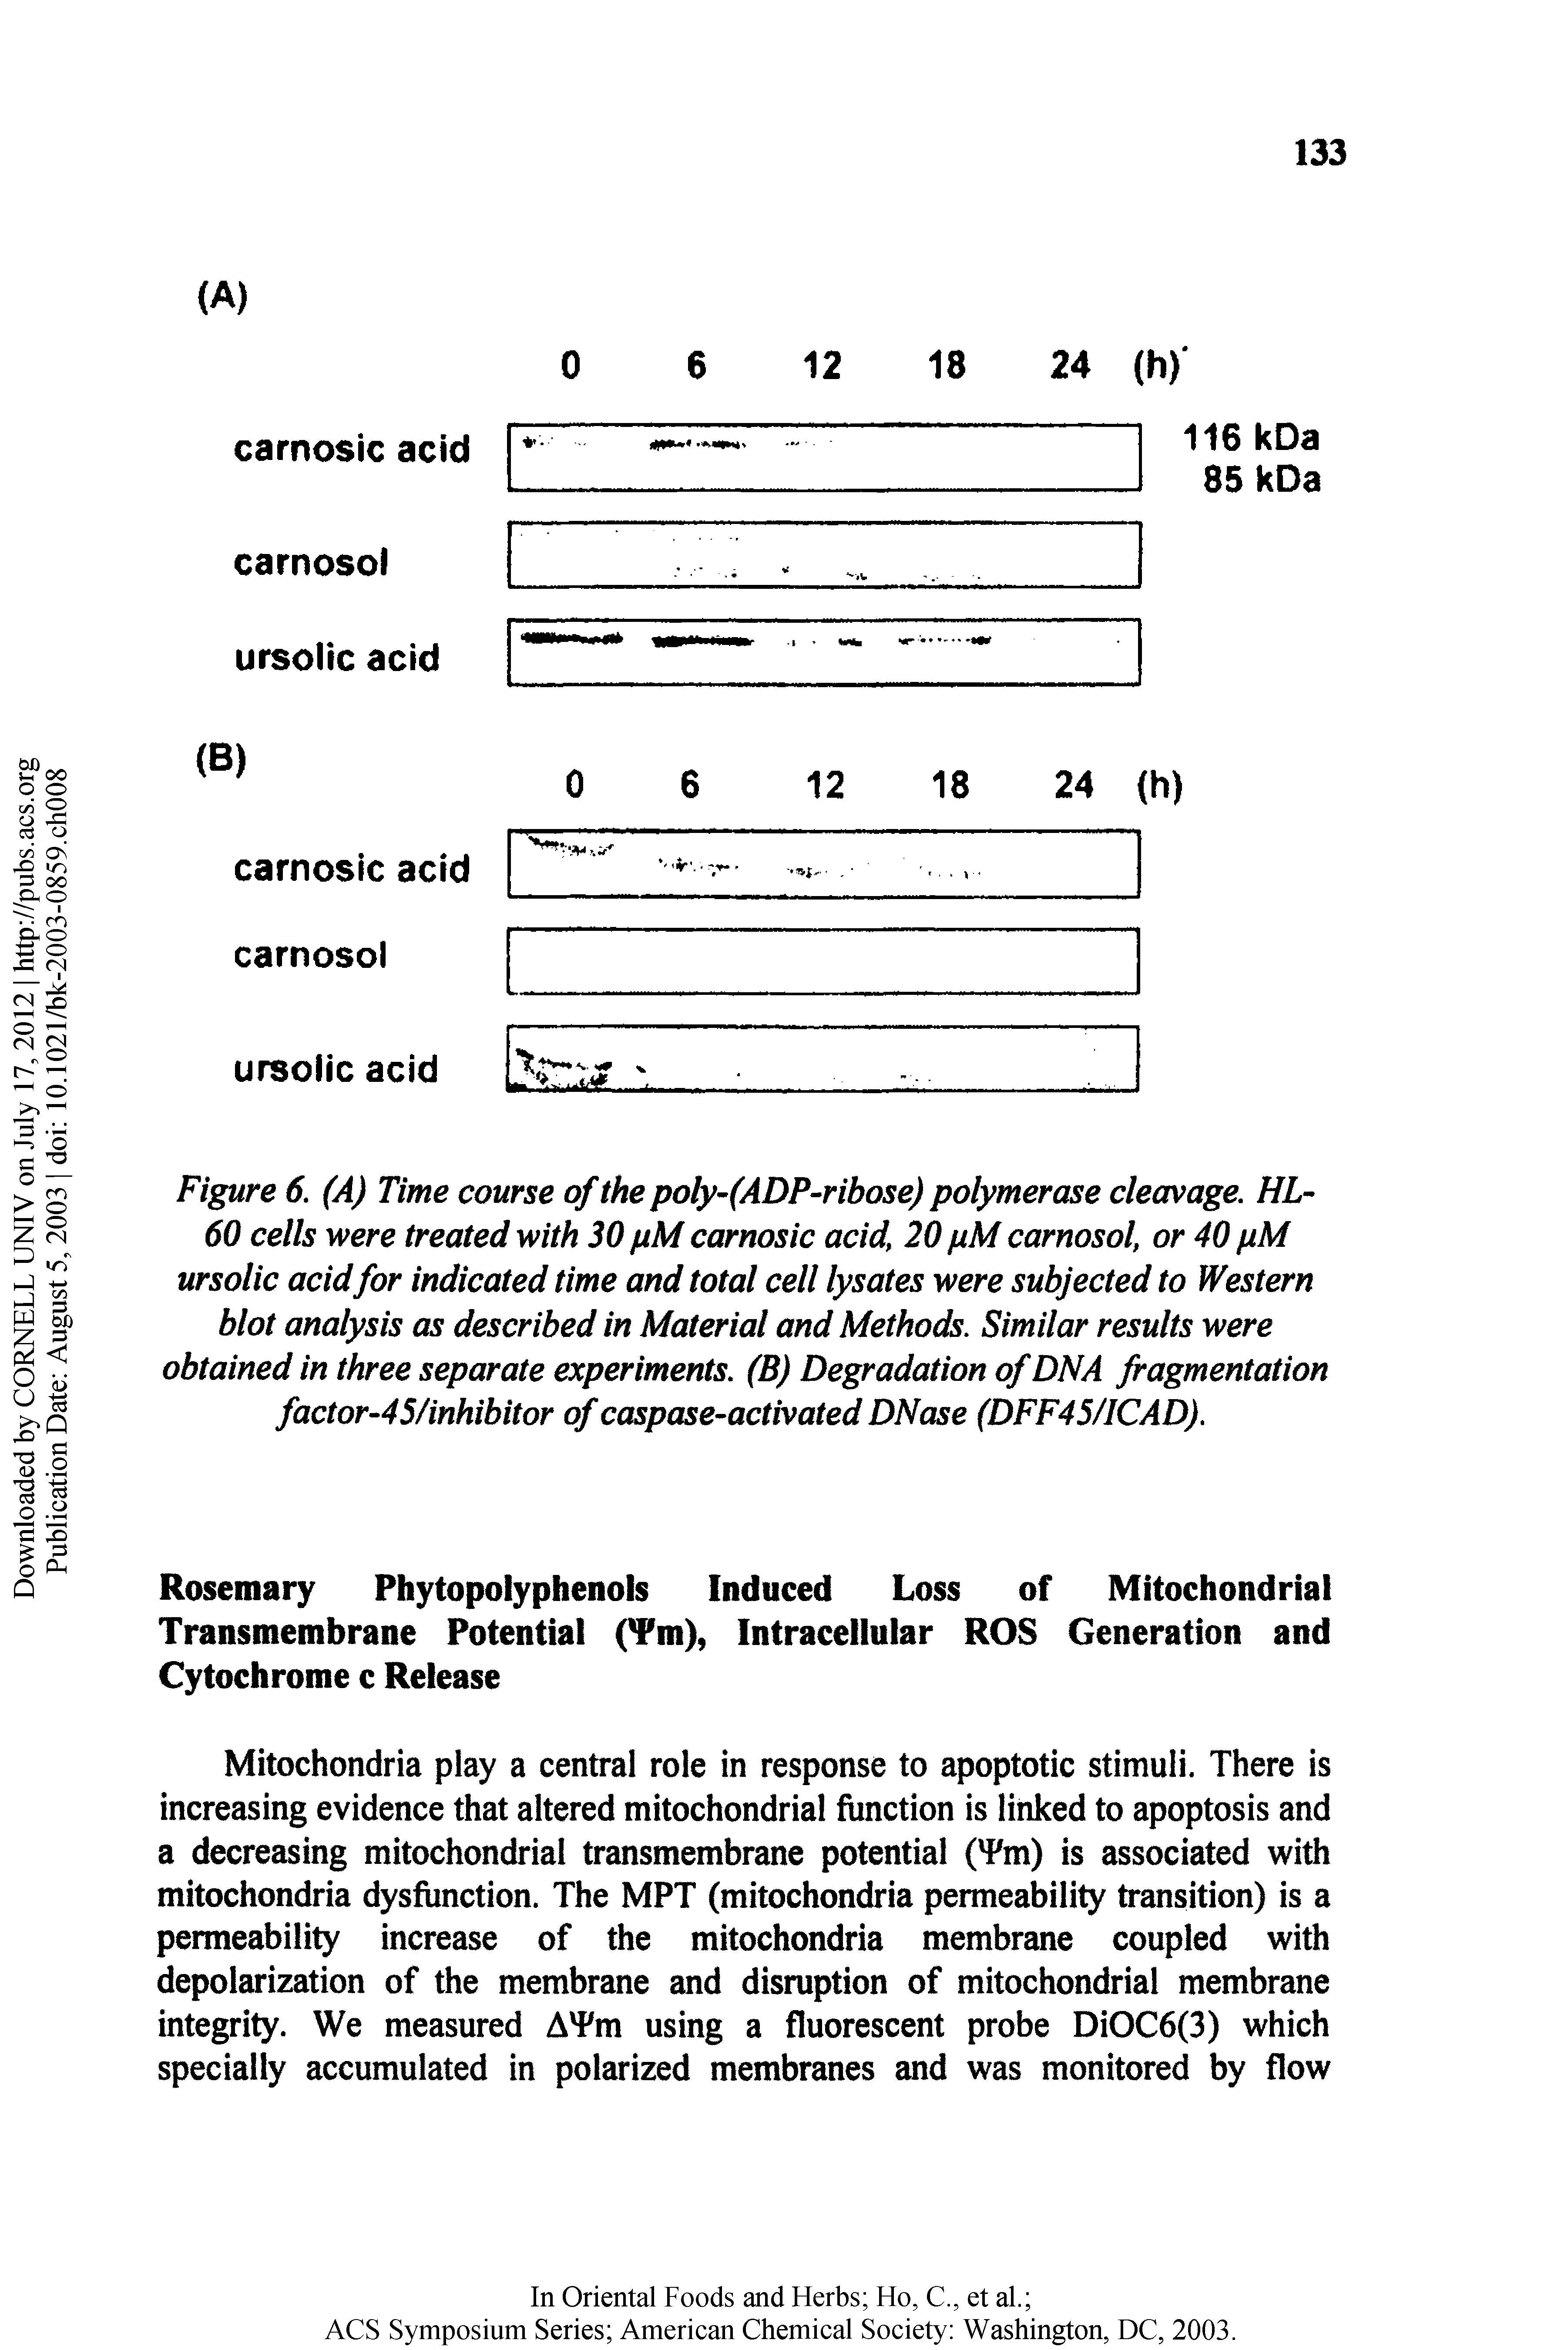 Figure 6. (A) Time course of the pofy-(ADP-ribose) polymerase cleavage. HL-60 cells were treated with 30 pM carnosic acid, 20 pM carnosol, or 40 pM ursolic acid for indicated time and total cell lysates were subjected to Western blot analysis as described in Material and Methods. Similar results were obtained in three separate experiments. (B) Degradation of DNA fragmentation factor-4S/inhibitor of caspase-activated DNase (DFF45/ICAD).